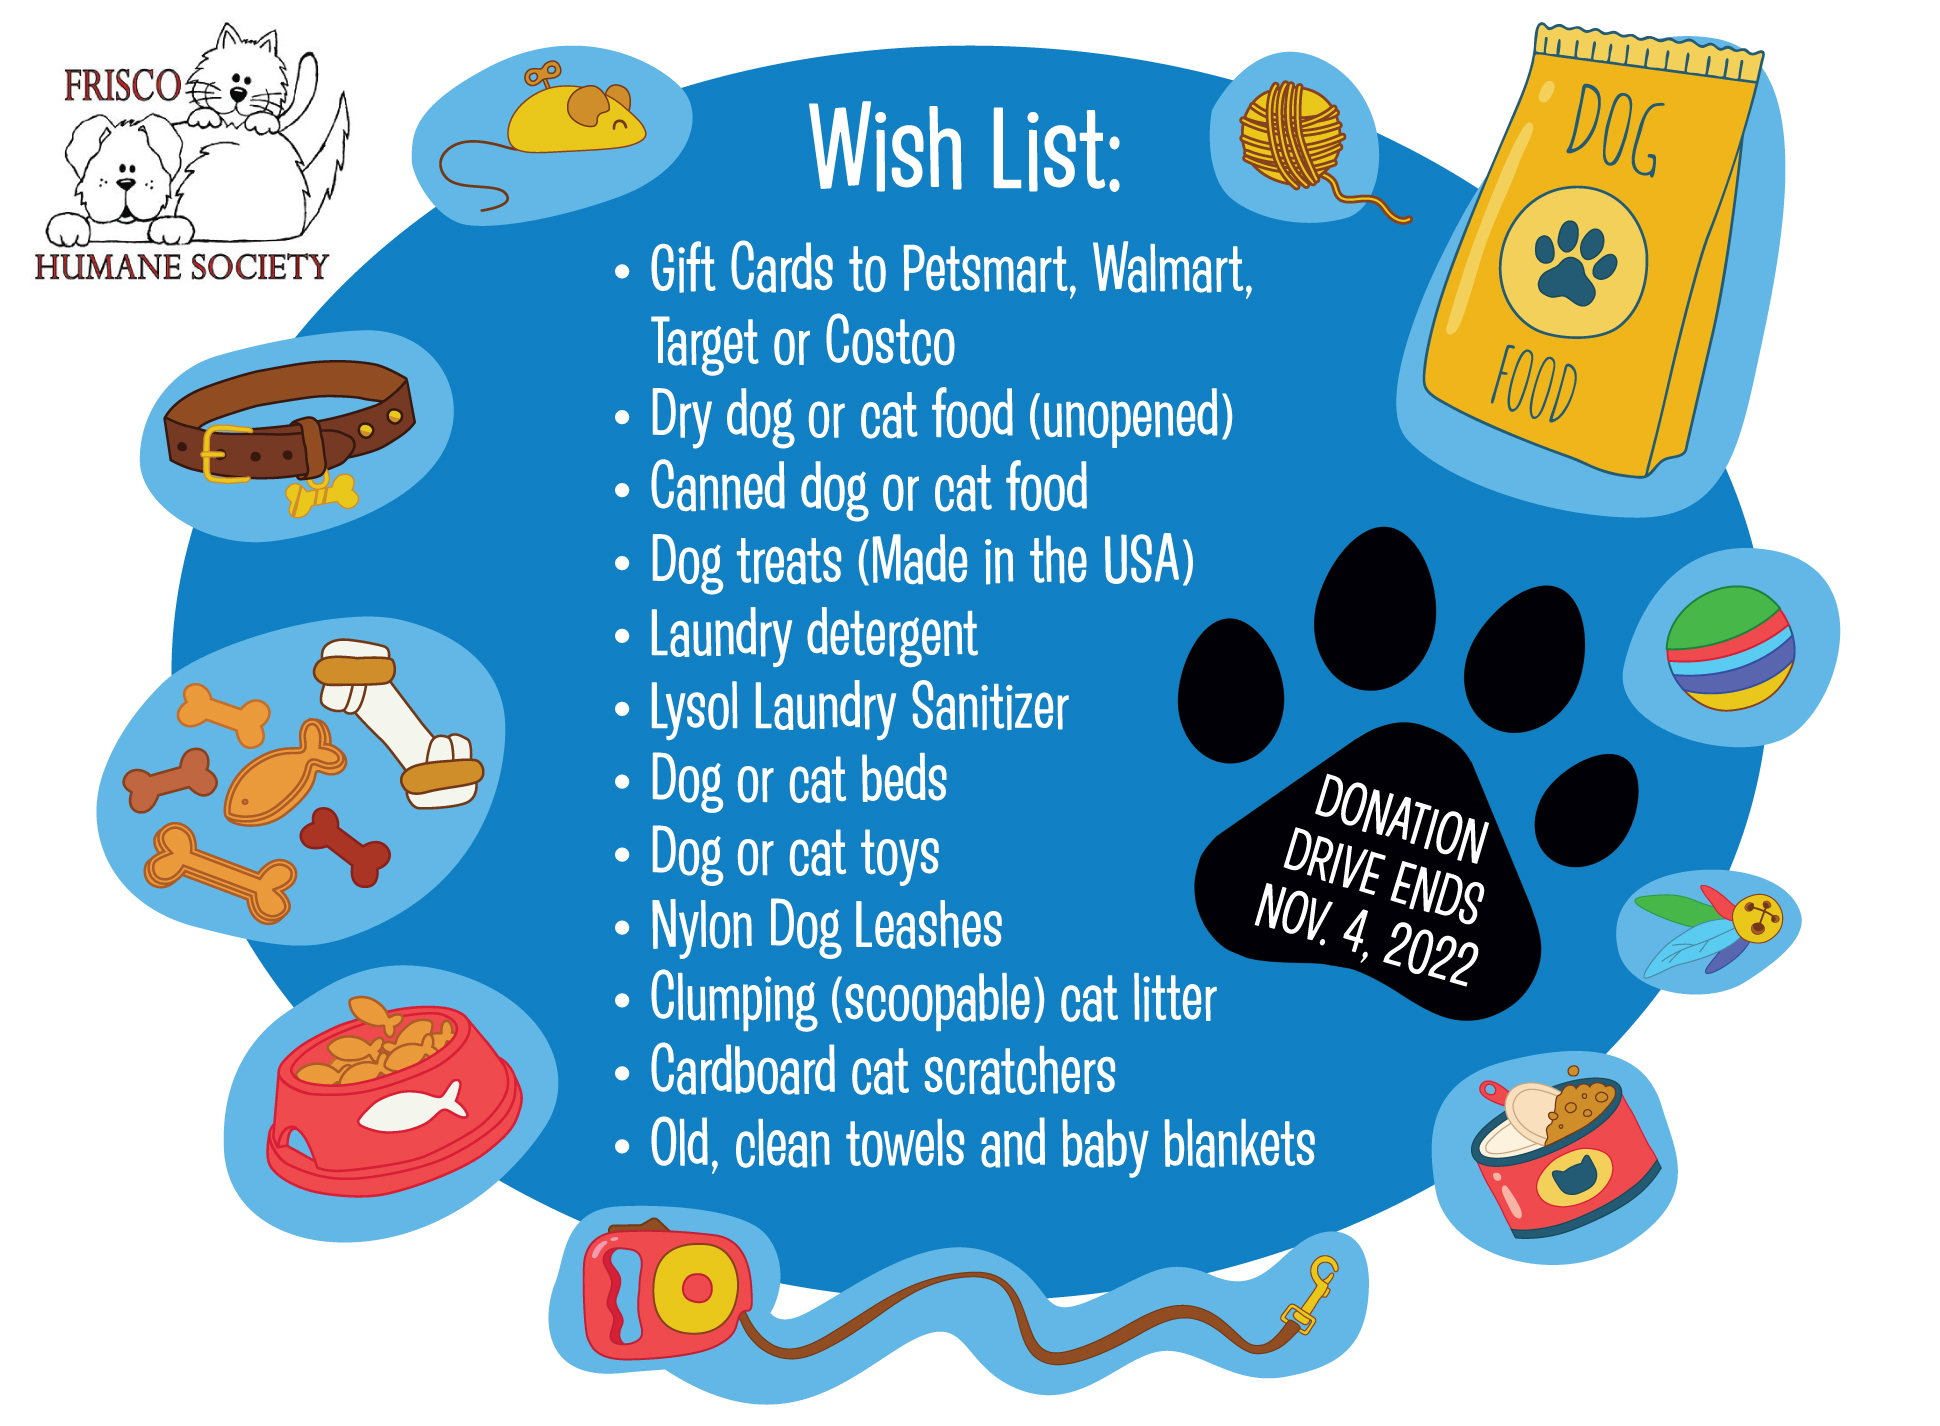 RxSmile donation drive Wish List for Frisco Humane Society